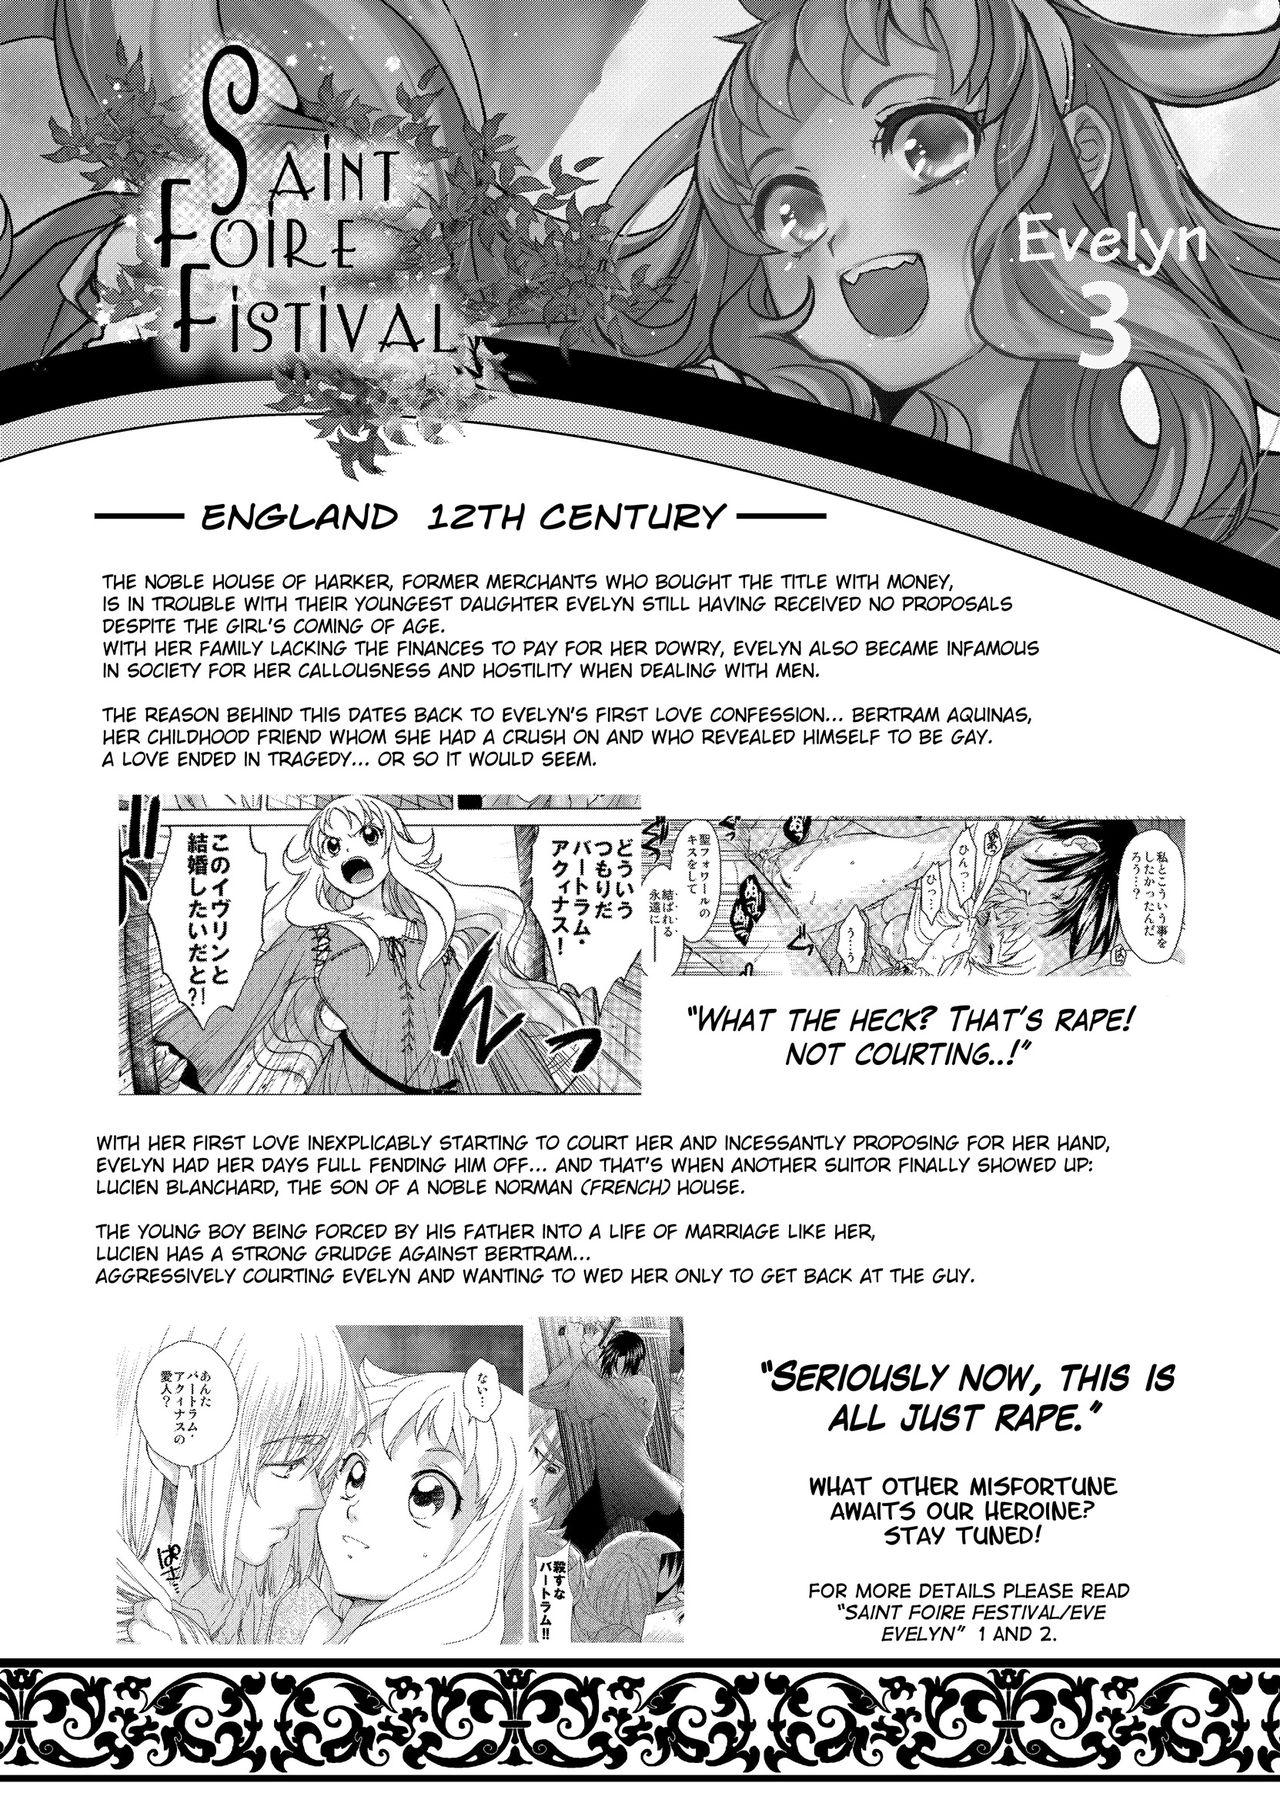 Gay Hairy Saint Foire Festival/eve Evelyn:3 - Original Colombiana - Page 4